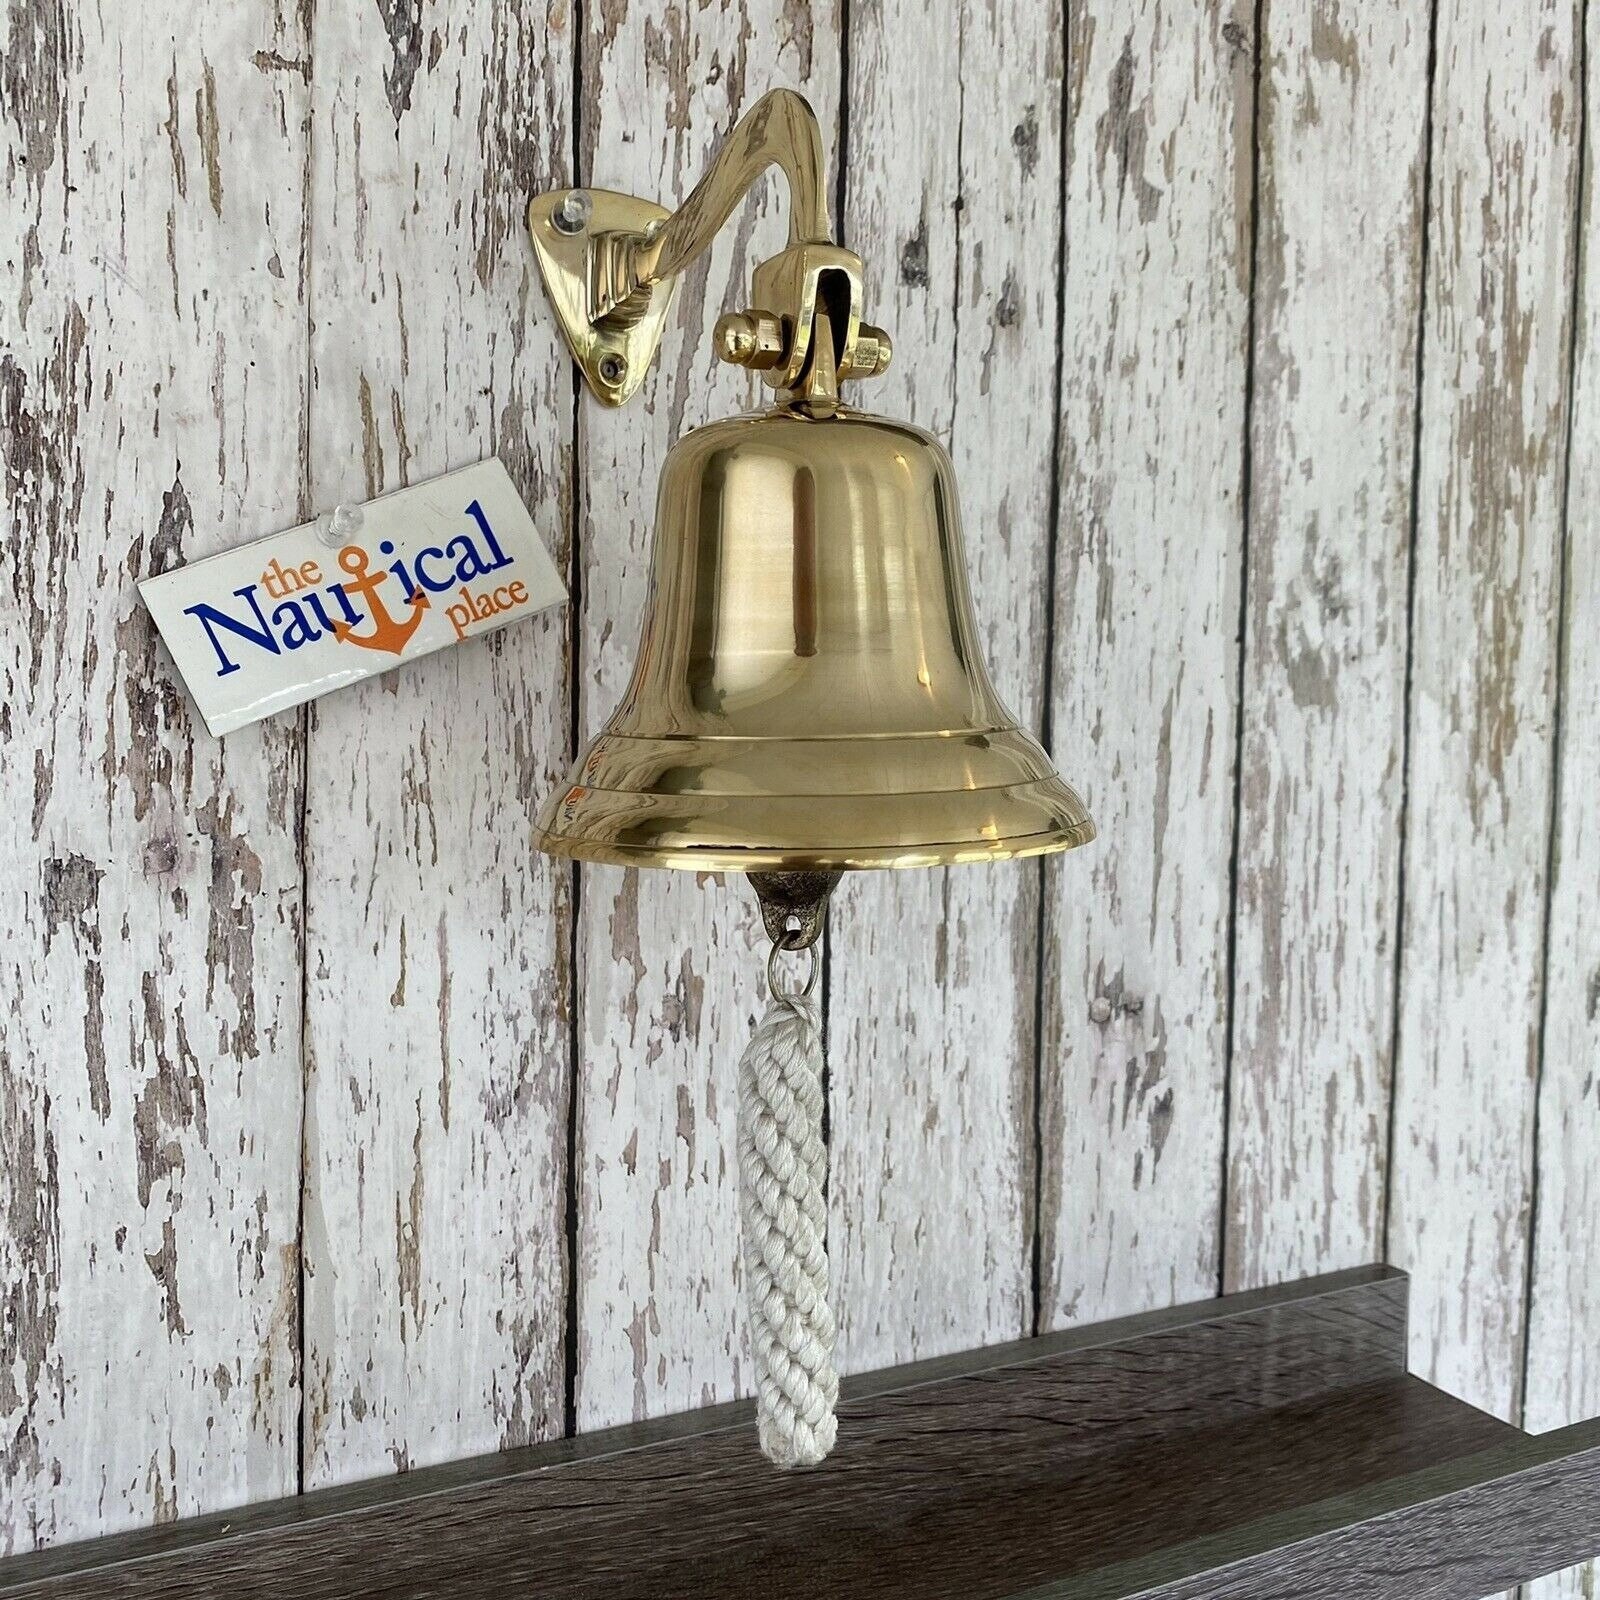 6 Nautical Polished Brass Ship Bell with Hinged Hanging Bracket